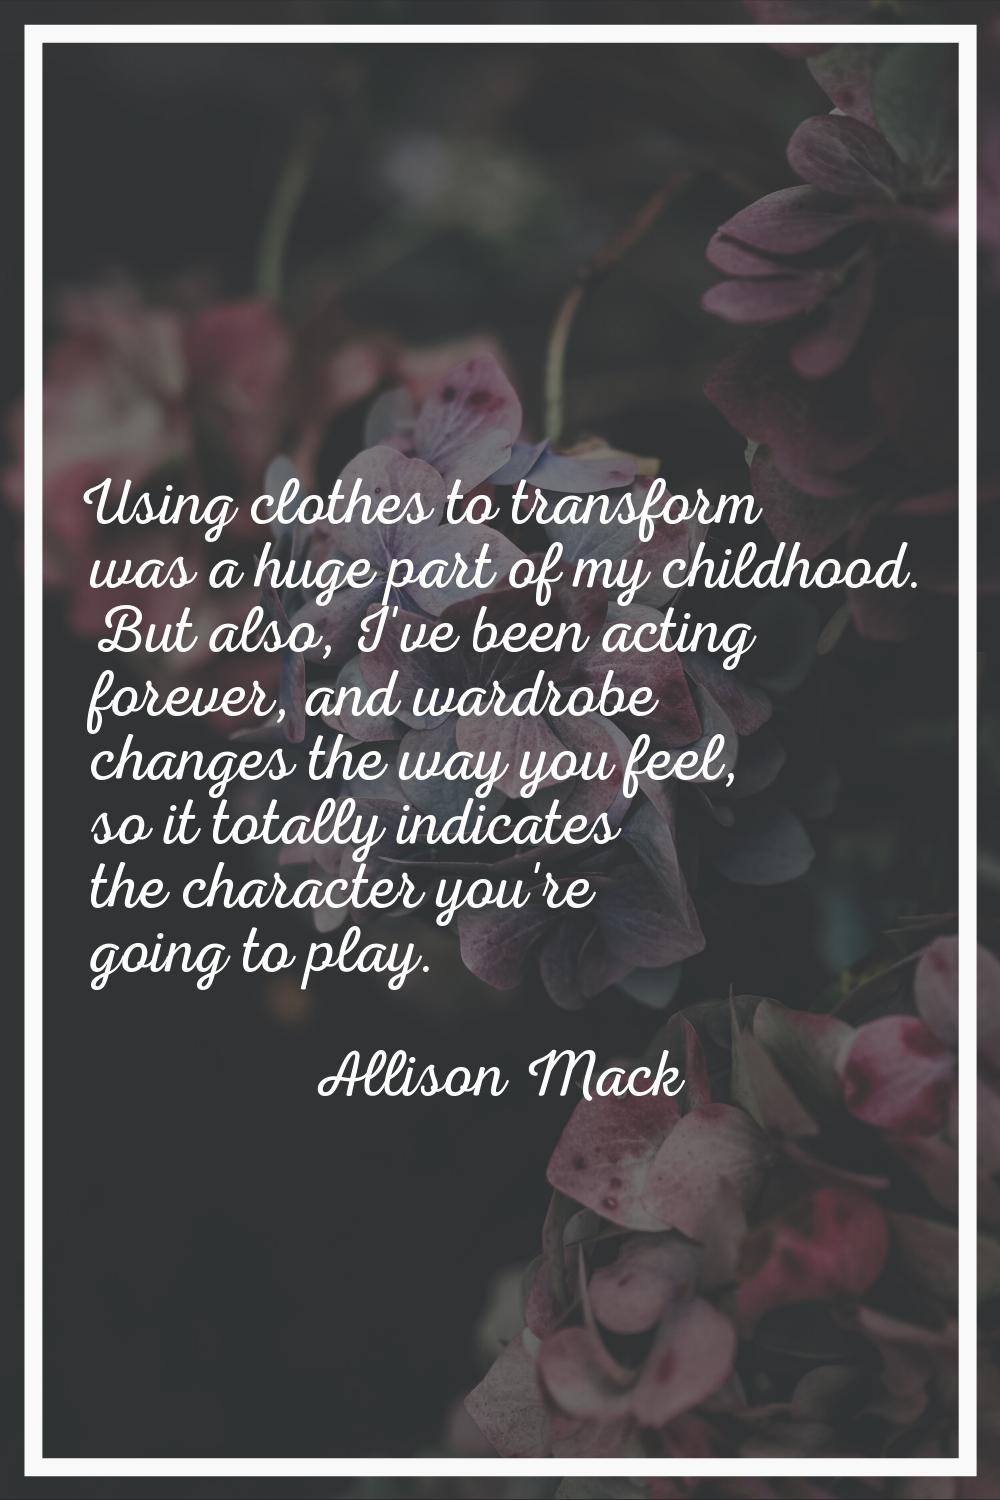 Using clothes to transform was a huge part of my childhood. But also, I've been acting forever, and